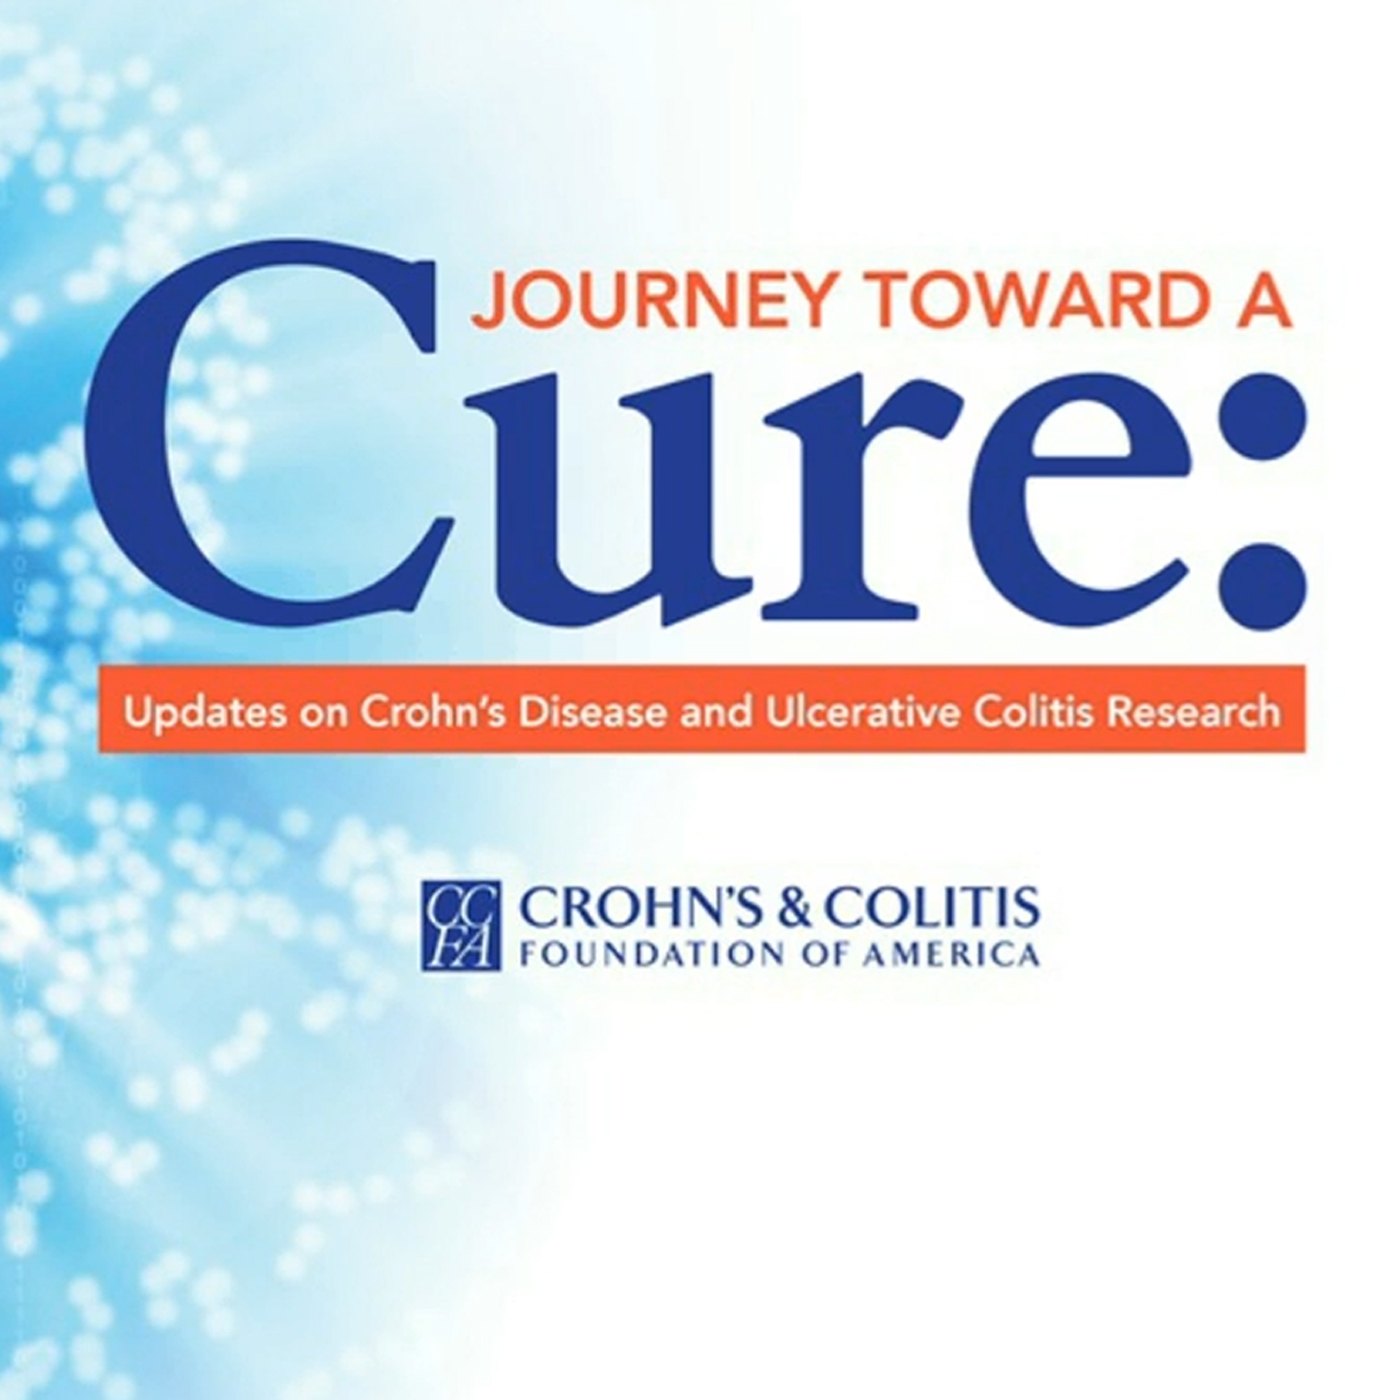 Journey Toward a Cure: Updates on Crohn's Disease and Ulcerative Colitis Research